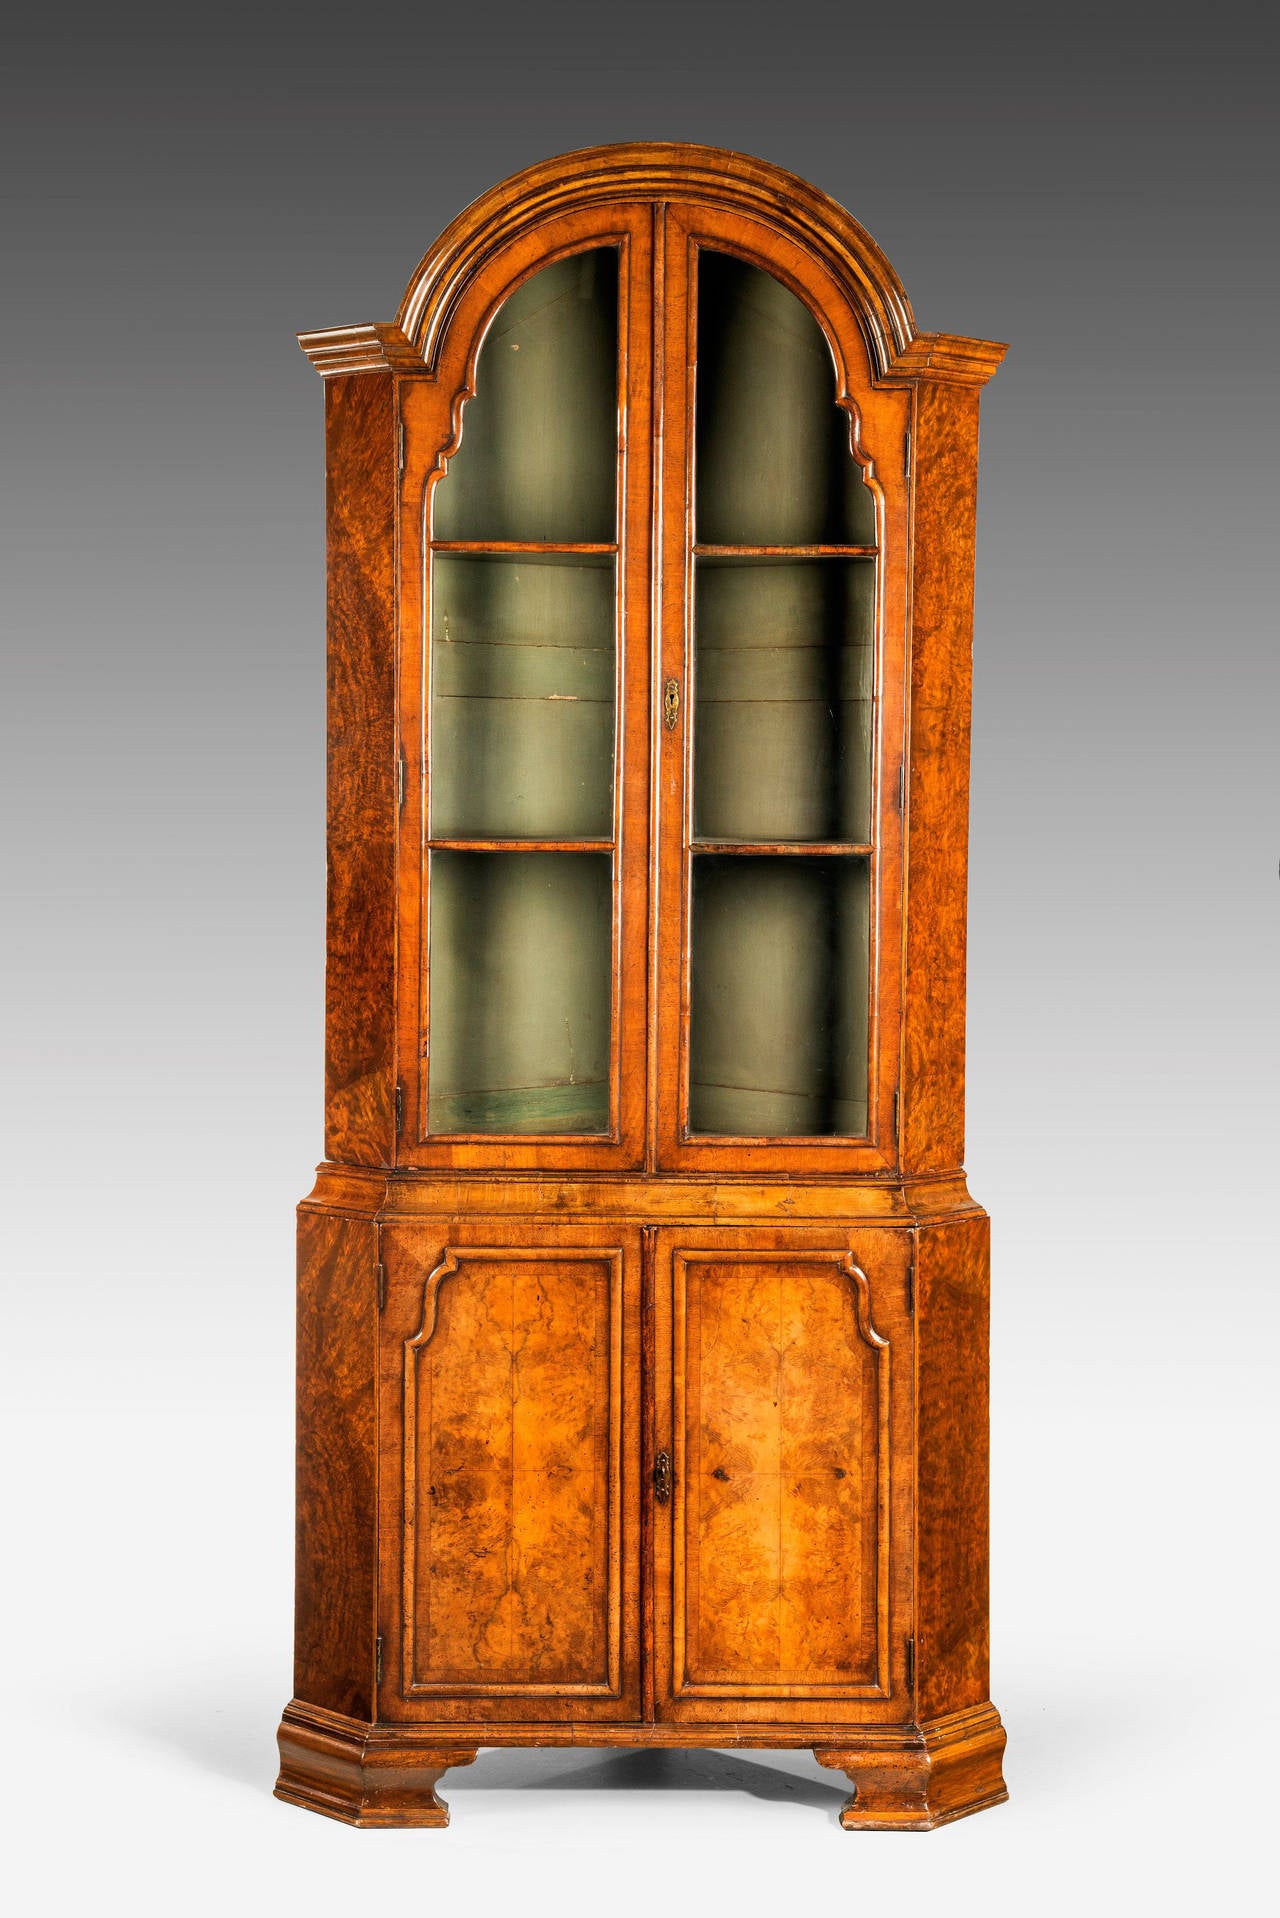 A beautifully figured Walnut Cupboard of Queen Anne Design. With shaped and tier mouldings and inset contrasting frames to the lower drawers. Original ogee bracket feet, all of the very best quality with a fine warm, honey colour.